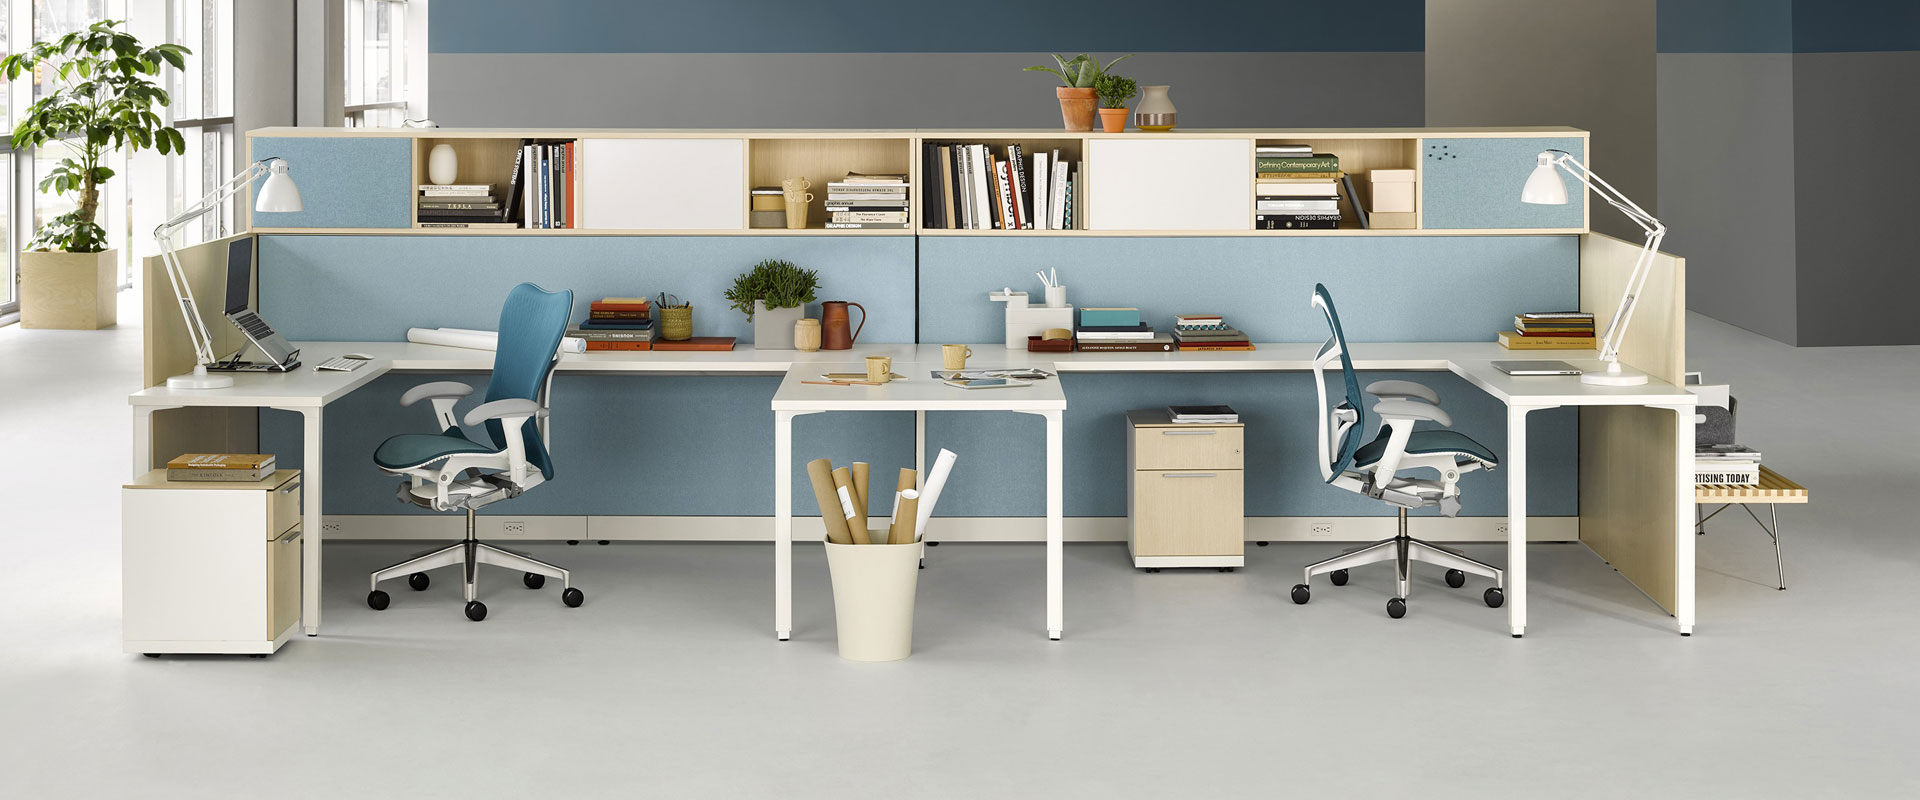 7 Tips To Replace Your Office Furniture My Decorative